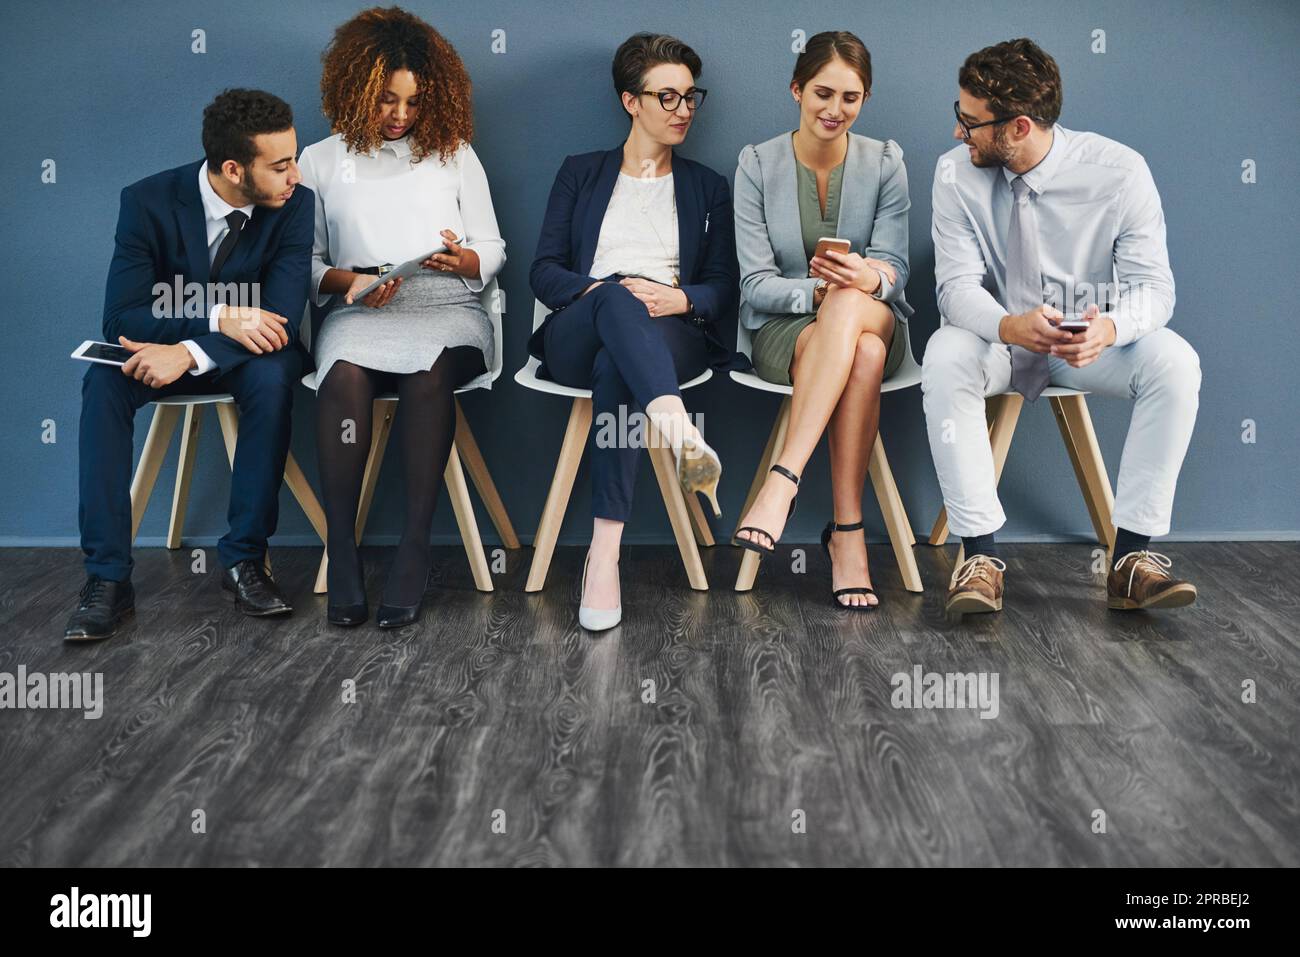 Group of business people networking on phones, digital tablets and social media, waiting in line. Diverse team of colleagues sitting in queue, talking and discussing against blue copyspace wall. Stock Photo